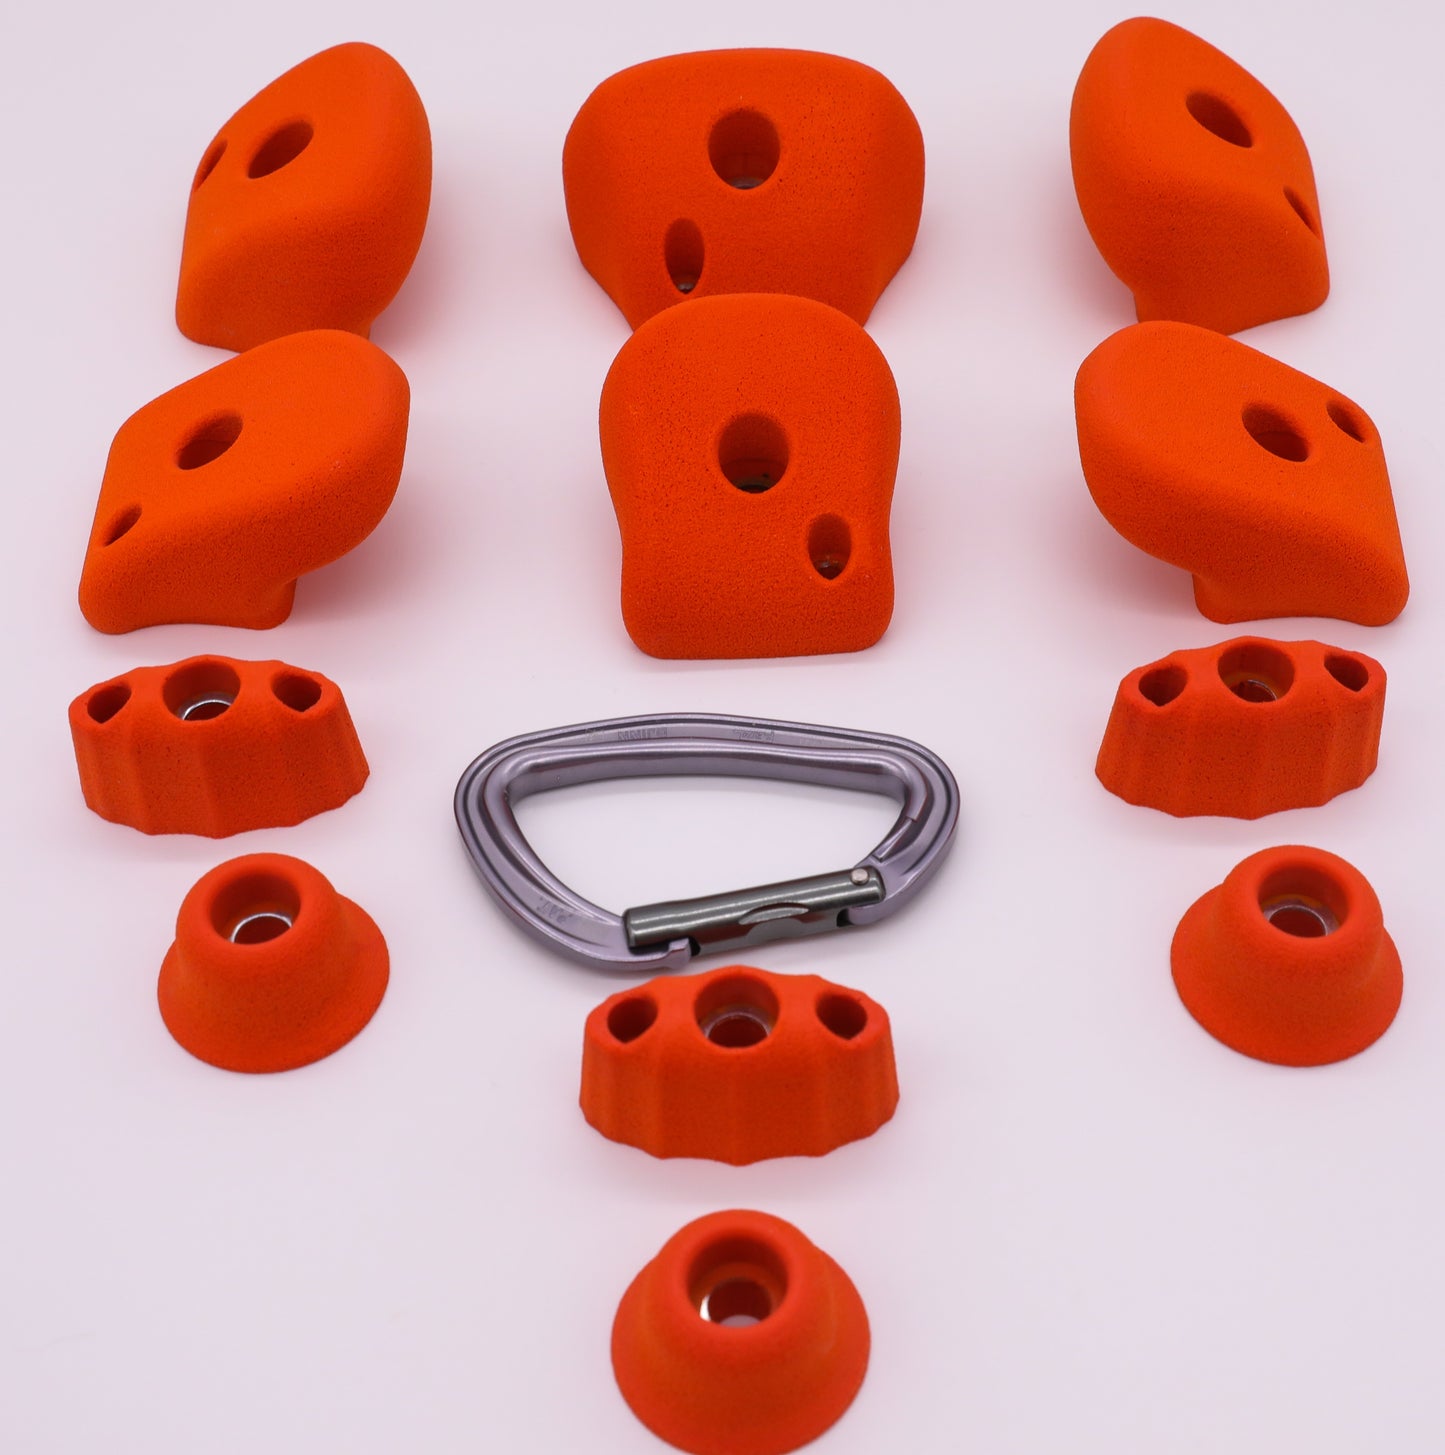 Bolt On Climbing Holds, Basic Beginners and Kids Set